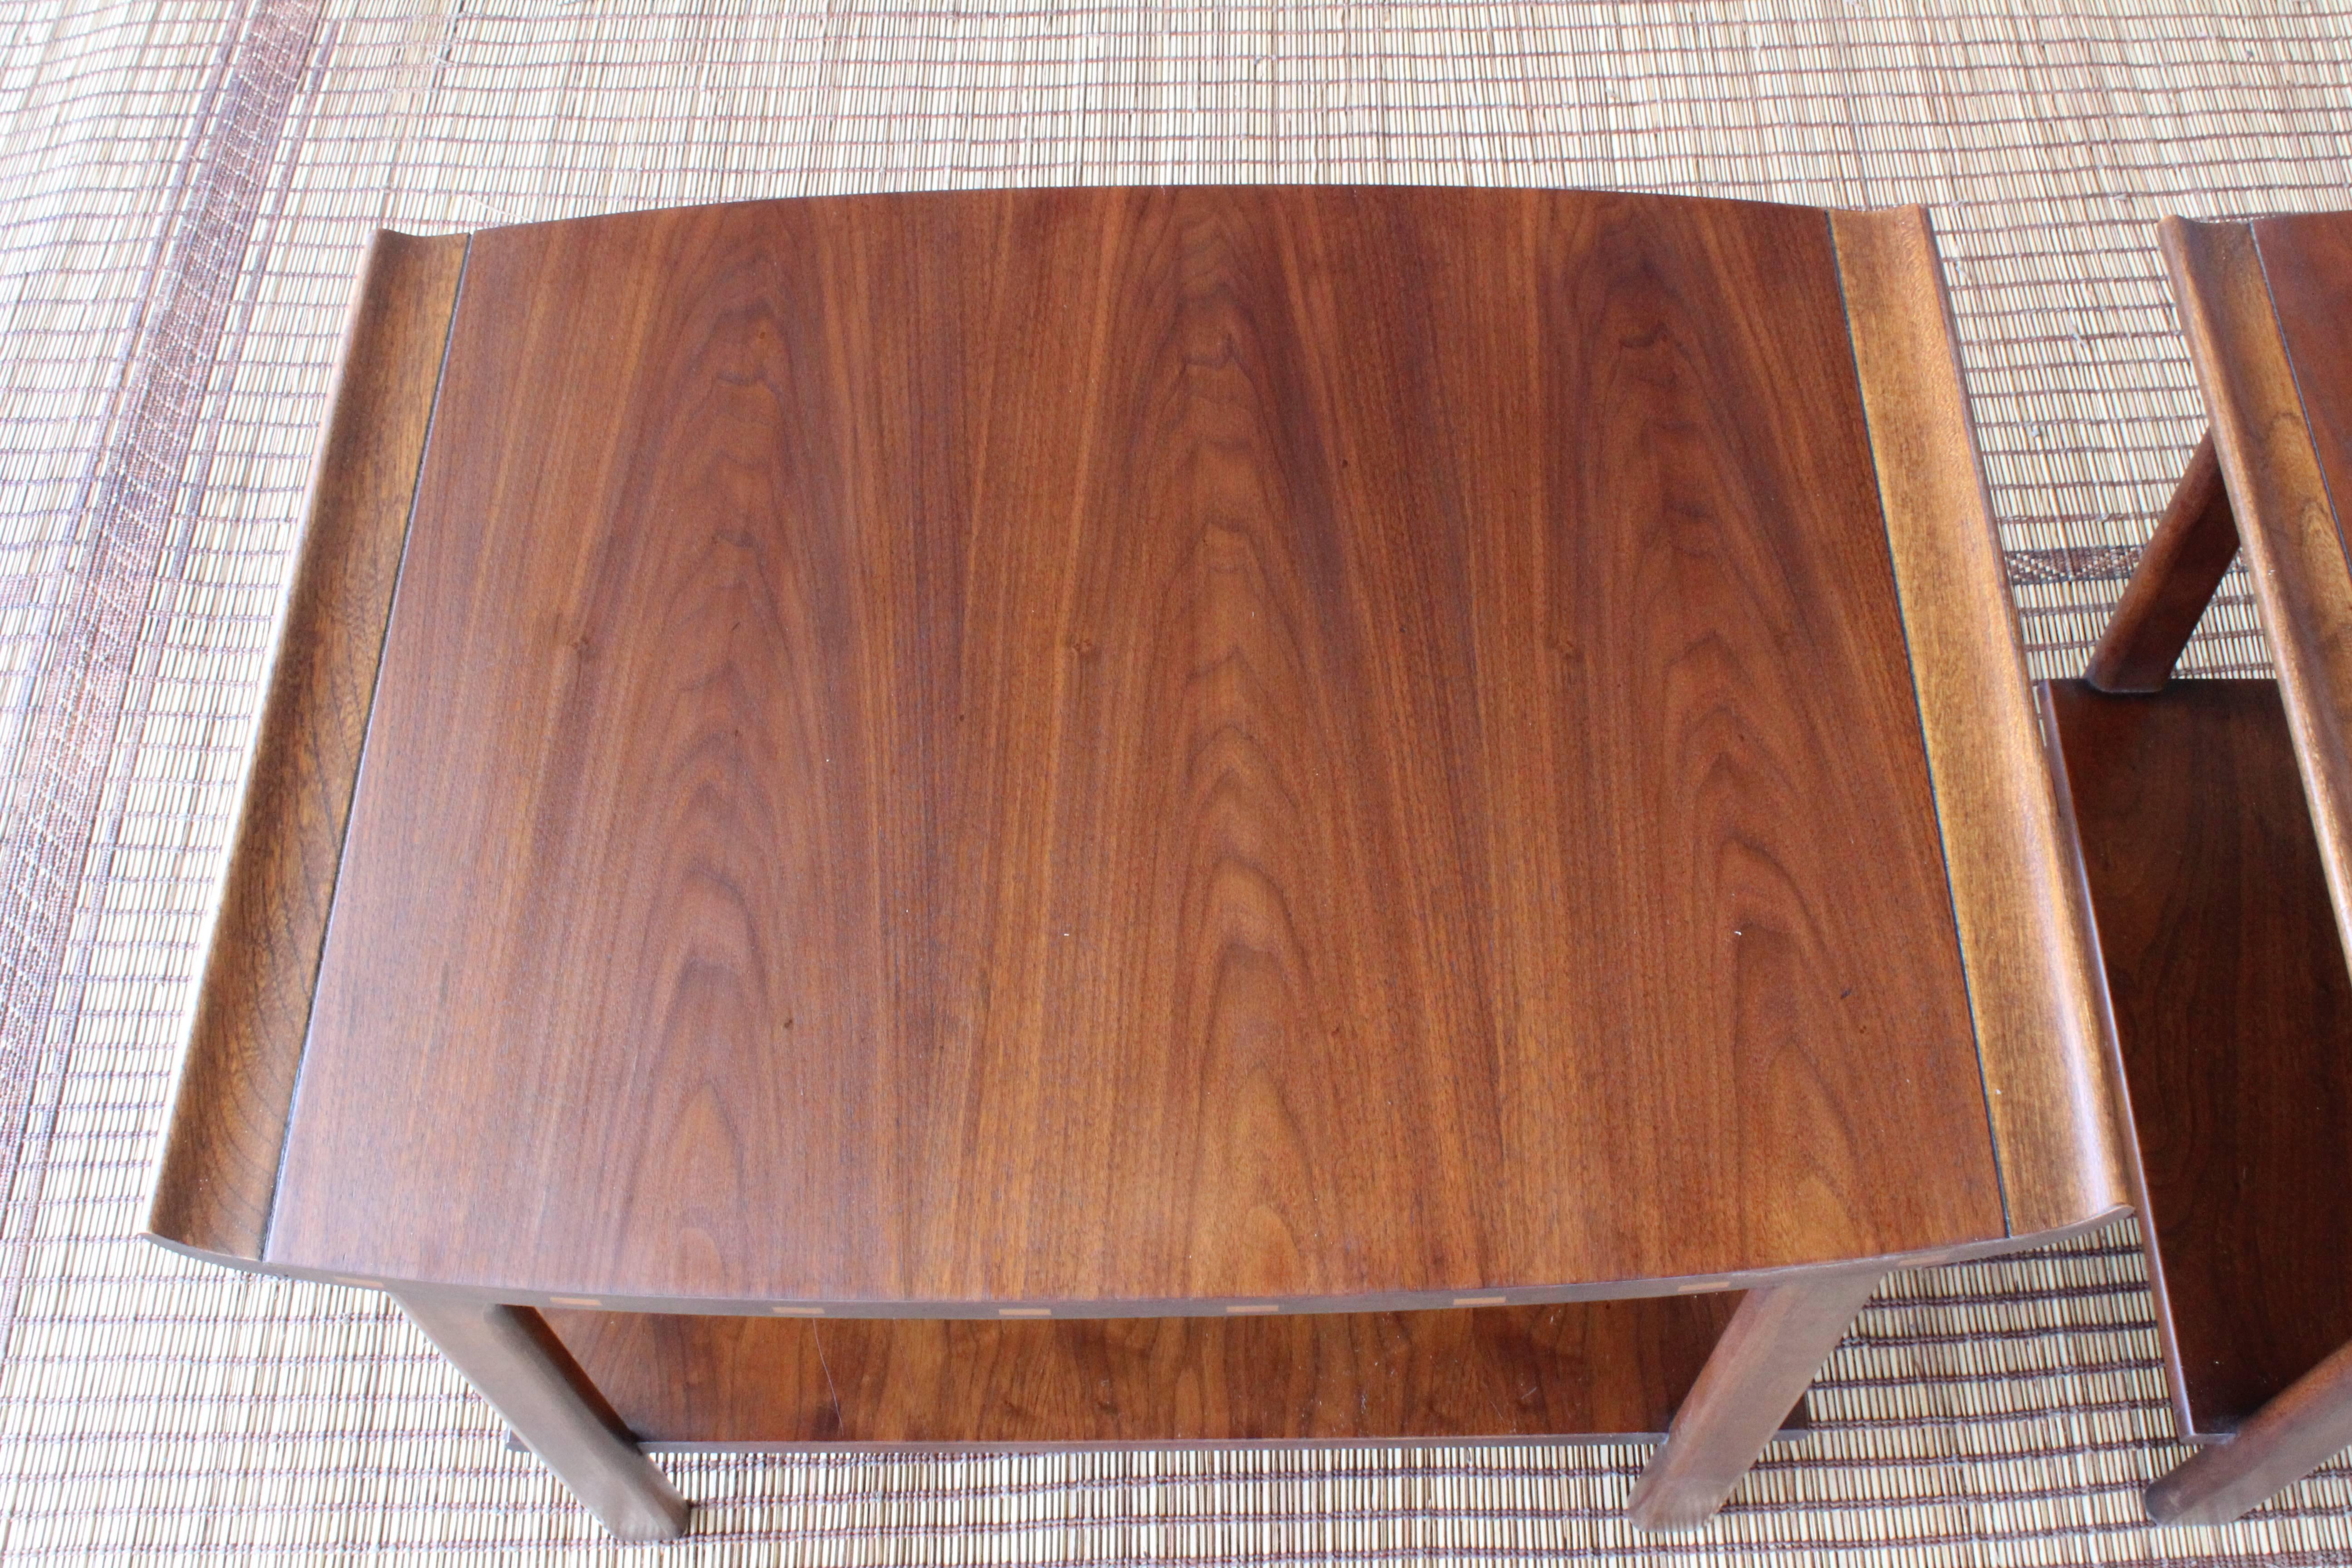 Pair of walnut end tables by Lane, 1960s. Both reveal beautiful walnut wood grain and have been recently refinished.